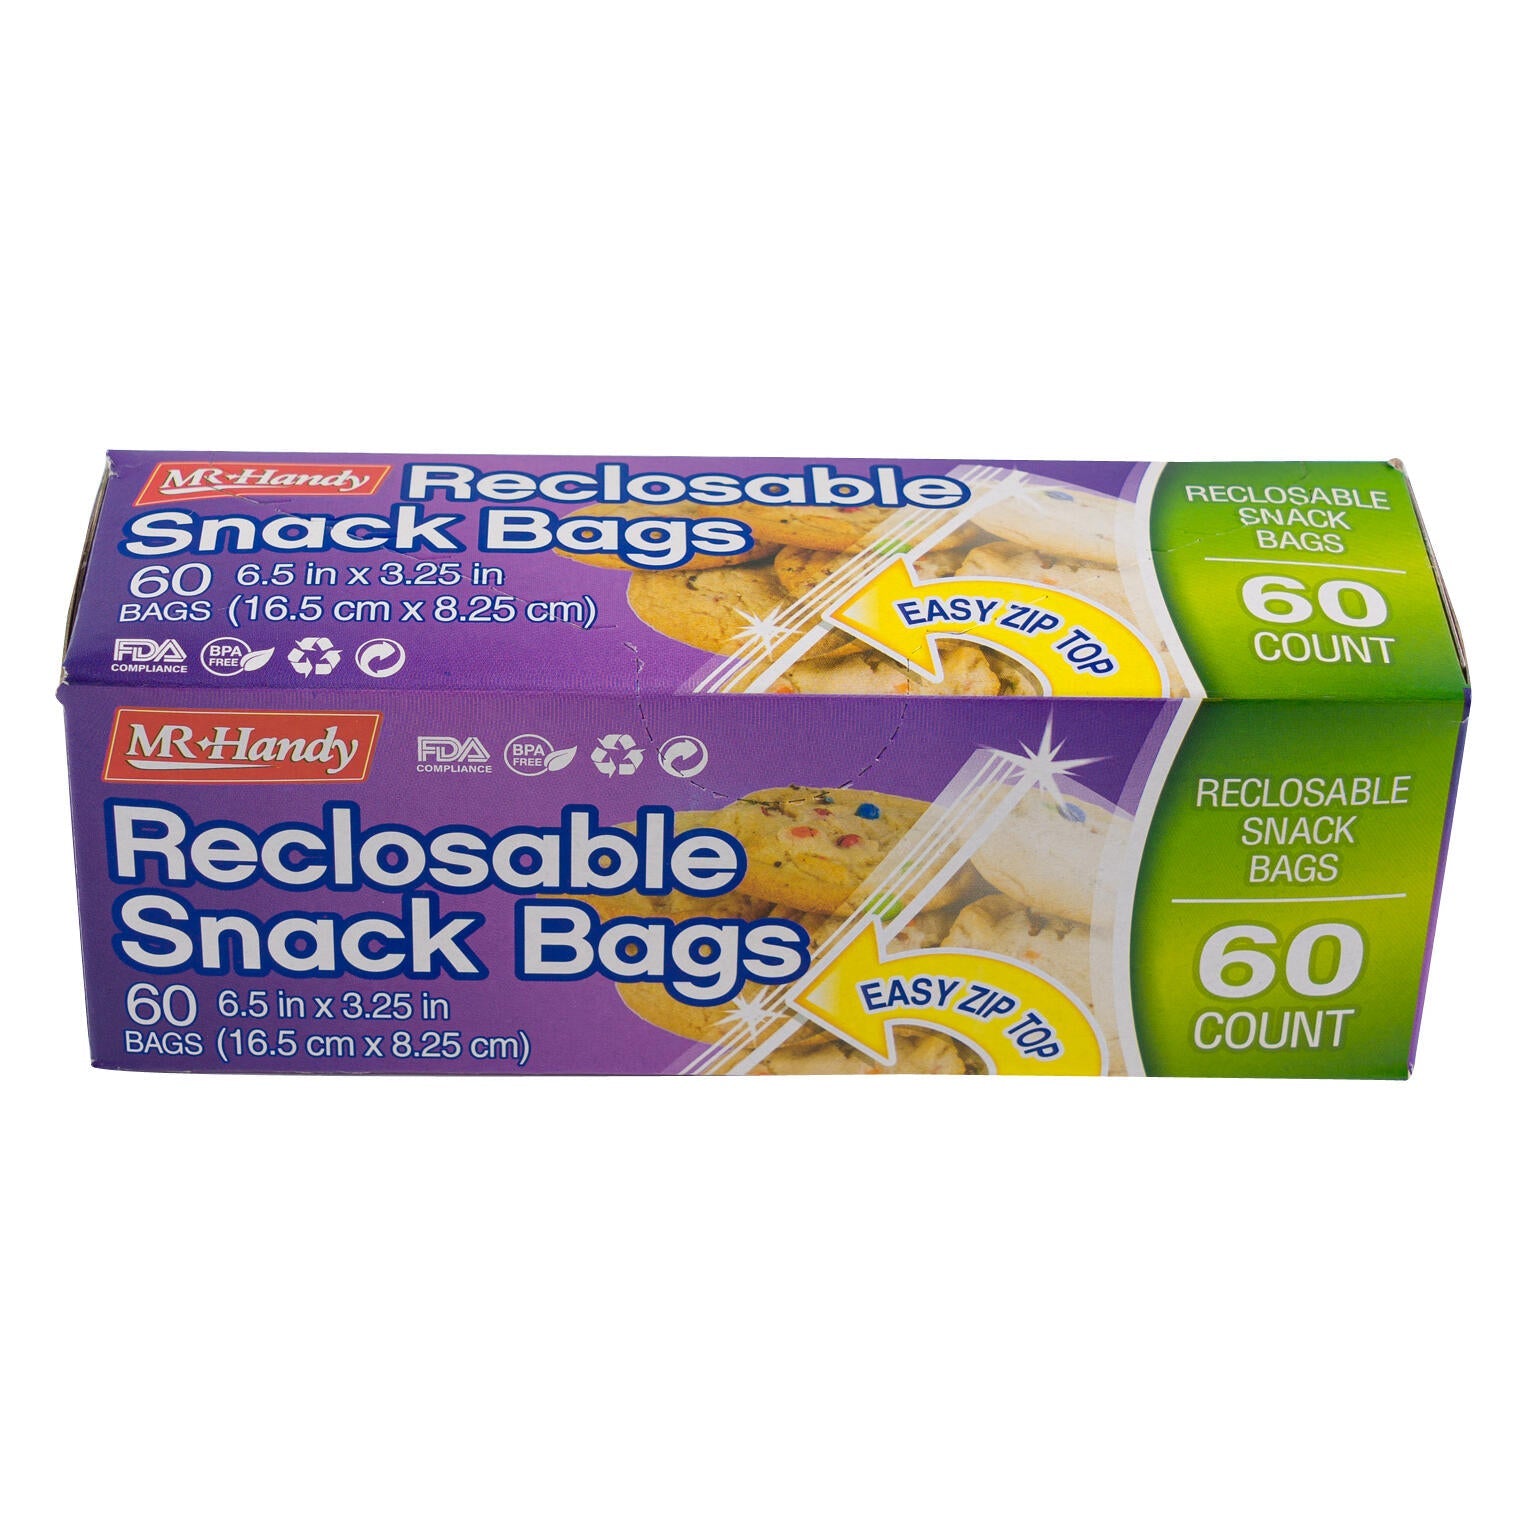 Reclosable Snack Bags